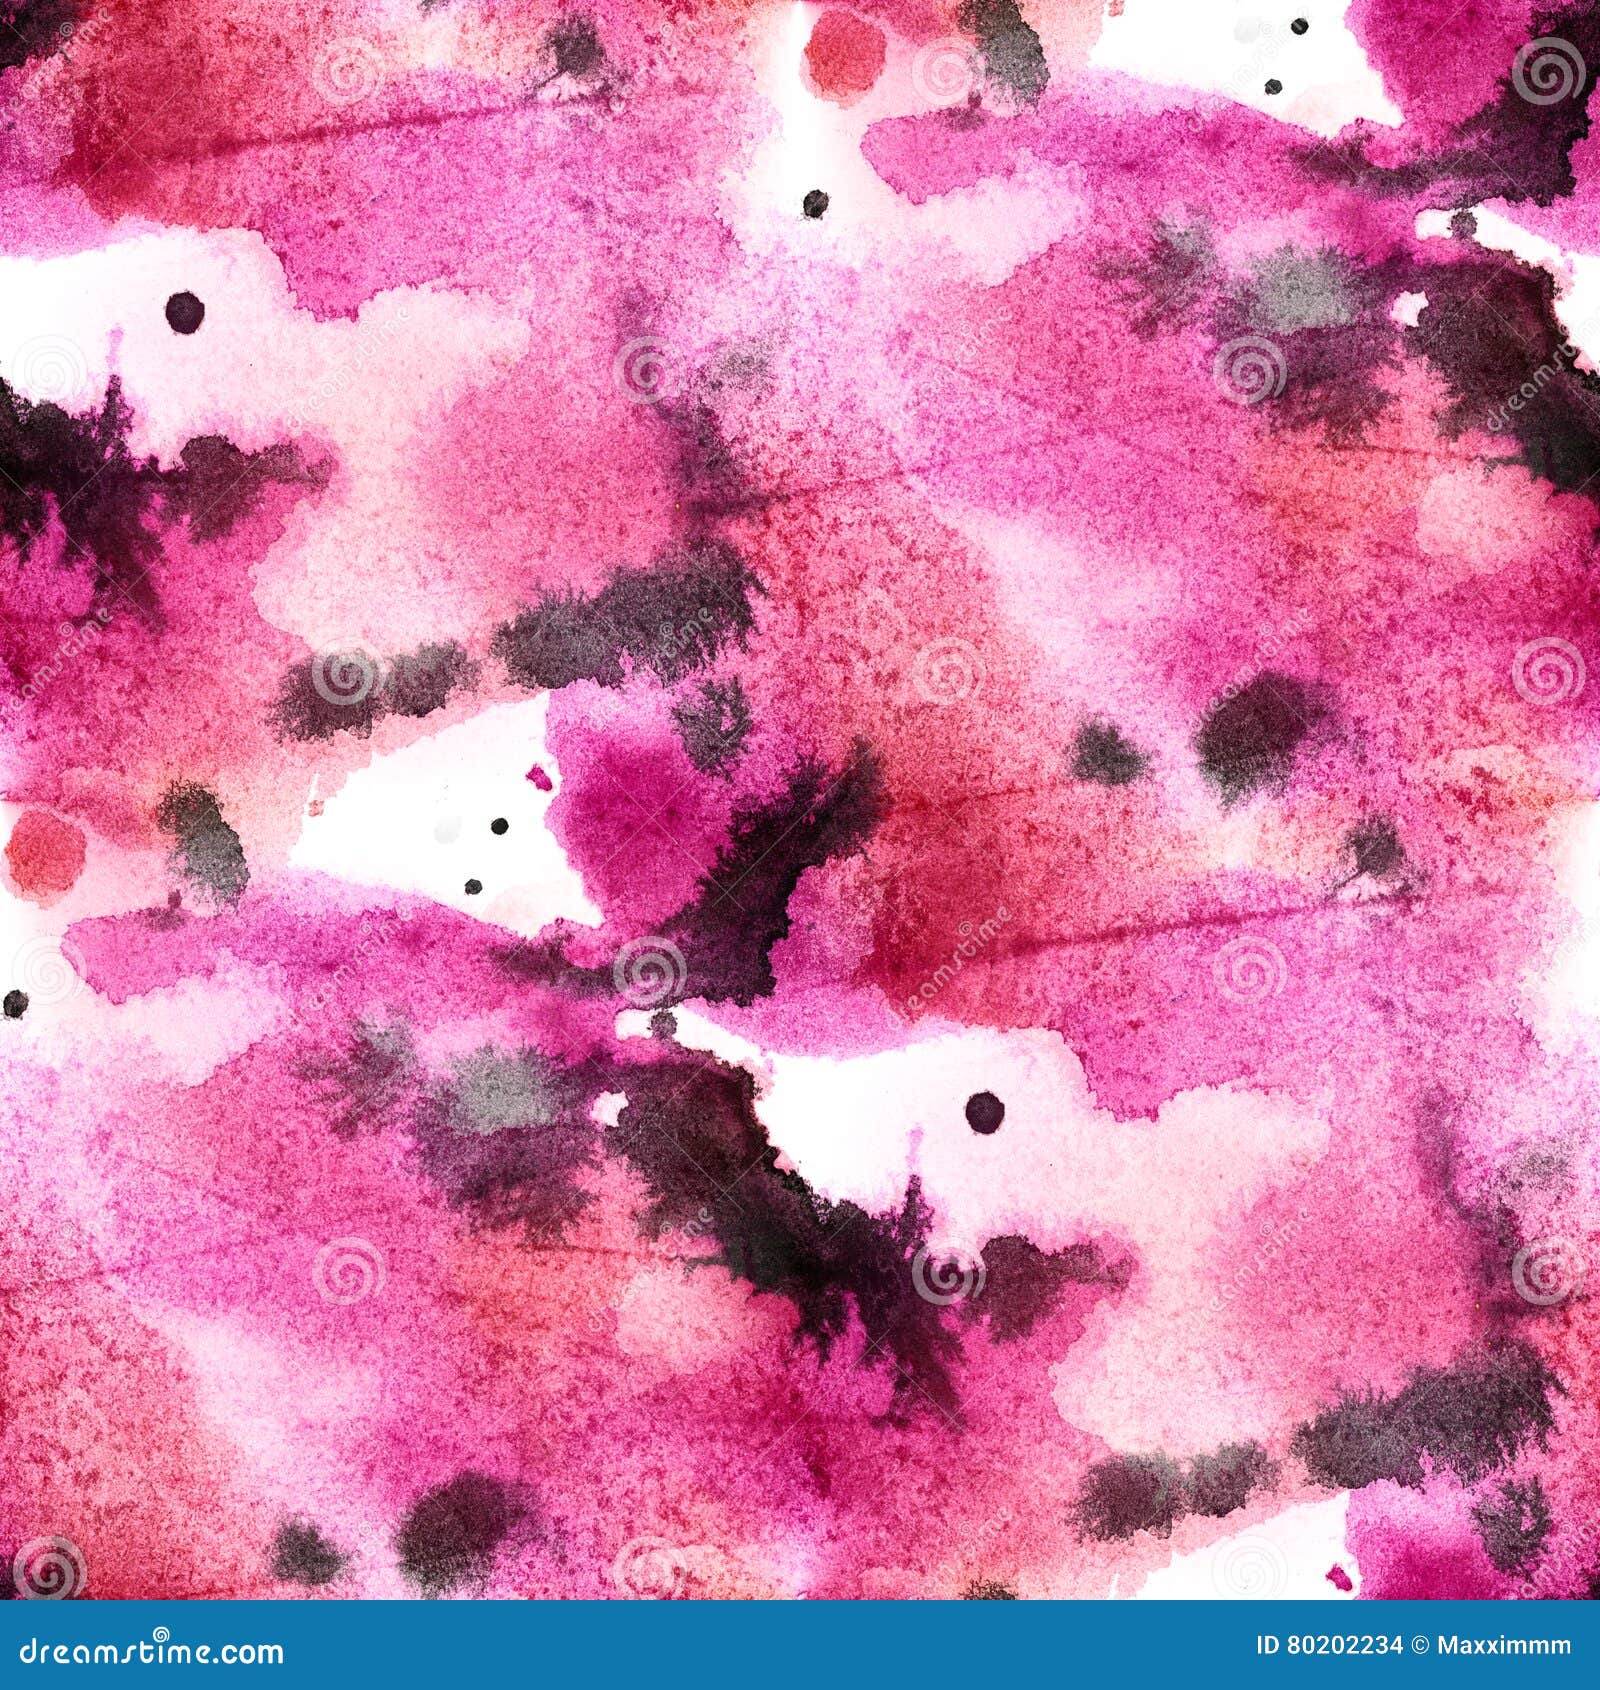 Colorful Abstract Seamless Watercolor for Pink Black Background ...